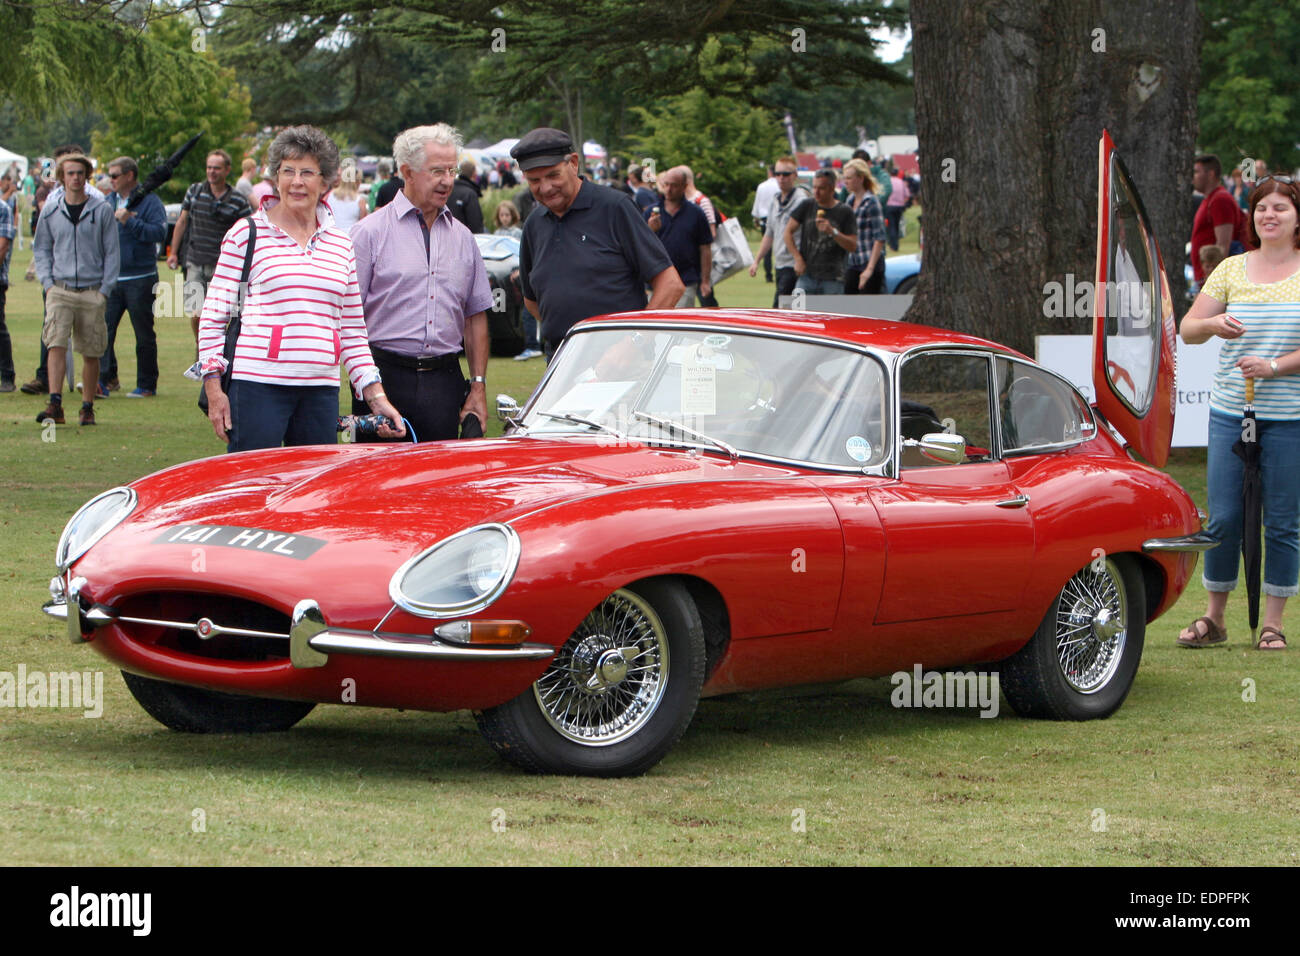 A Mark 1 Jaguar E-Type draws the attention at a classic car show in Wiltshire, England in 2014. Stock Photo